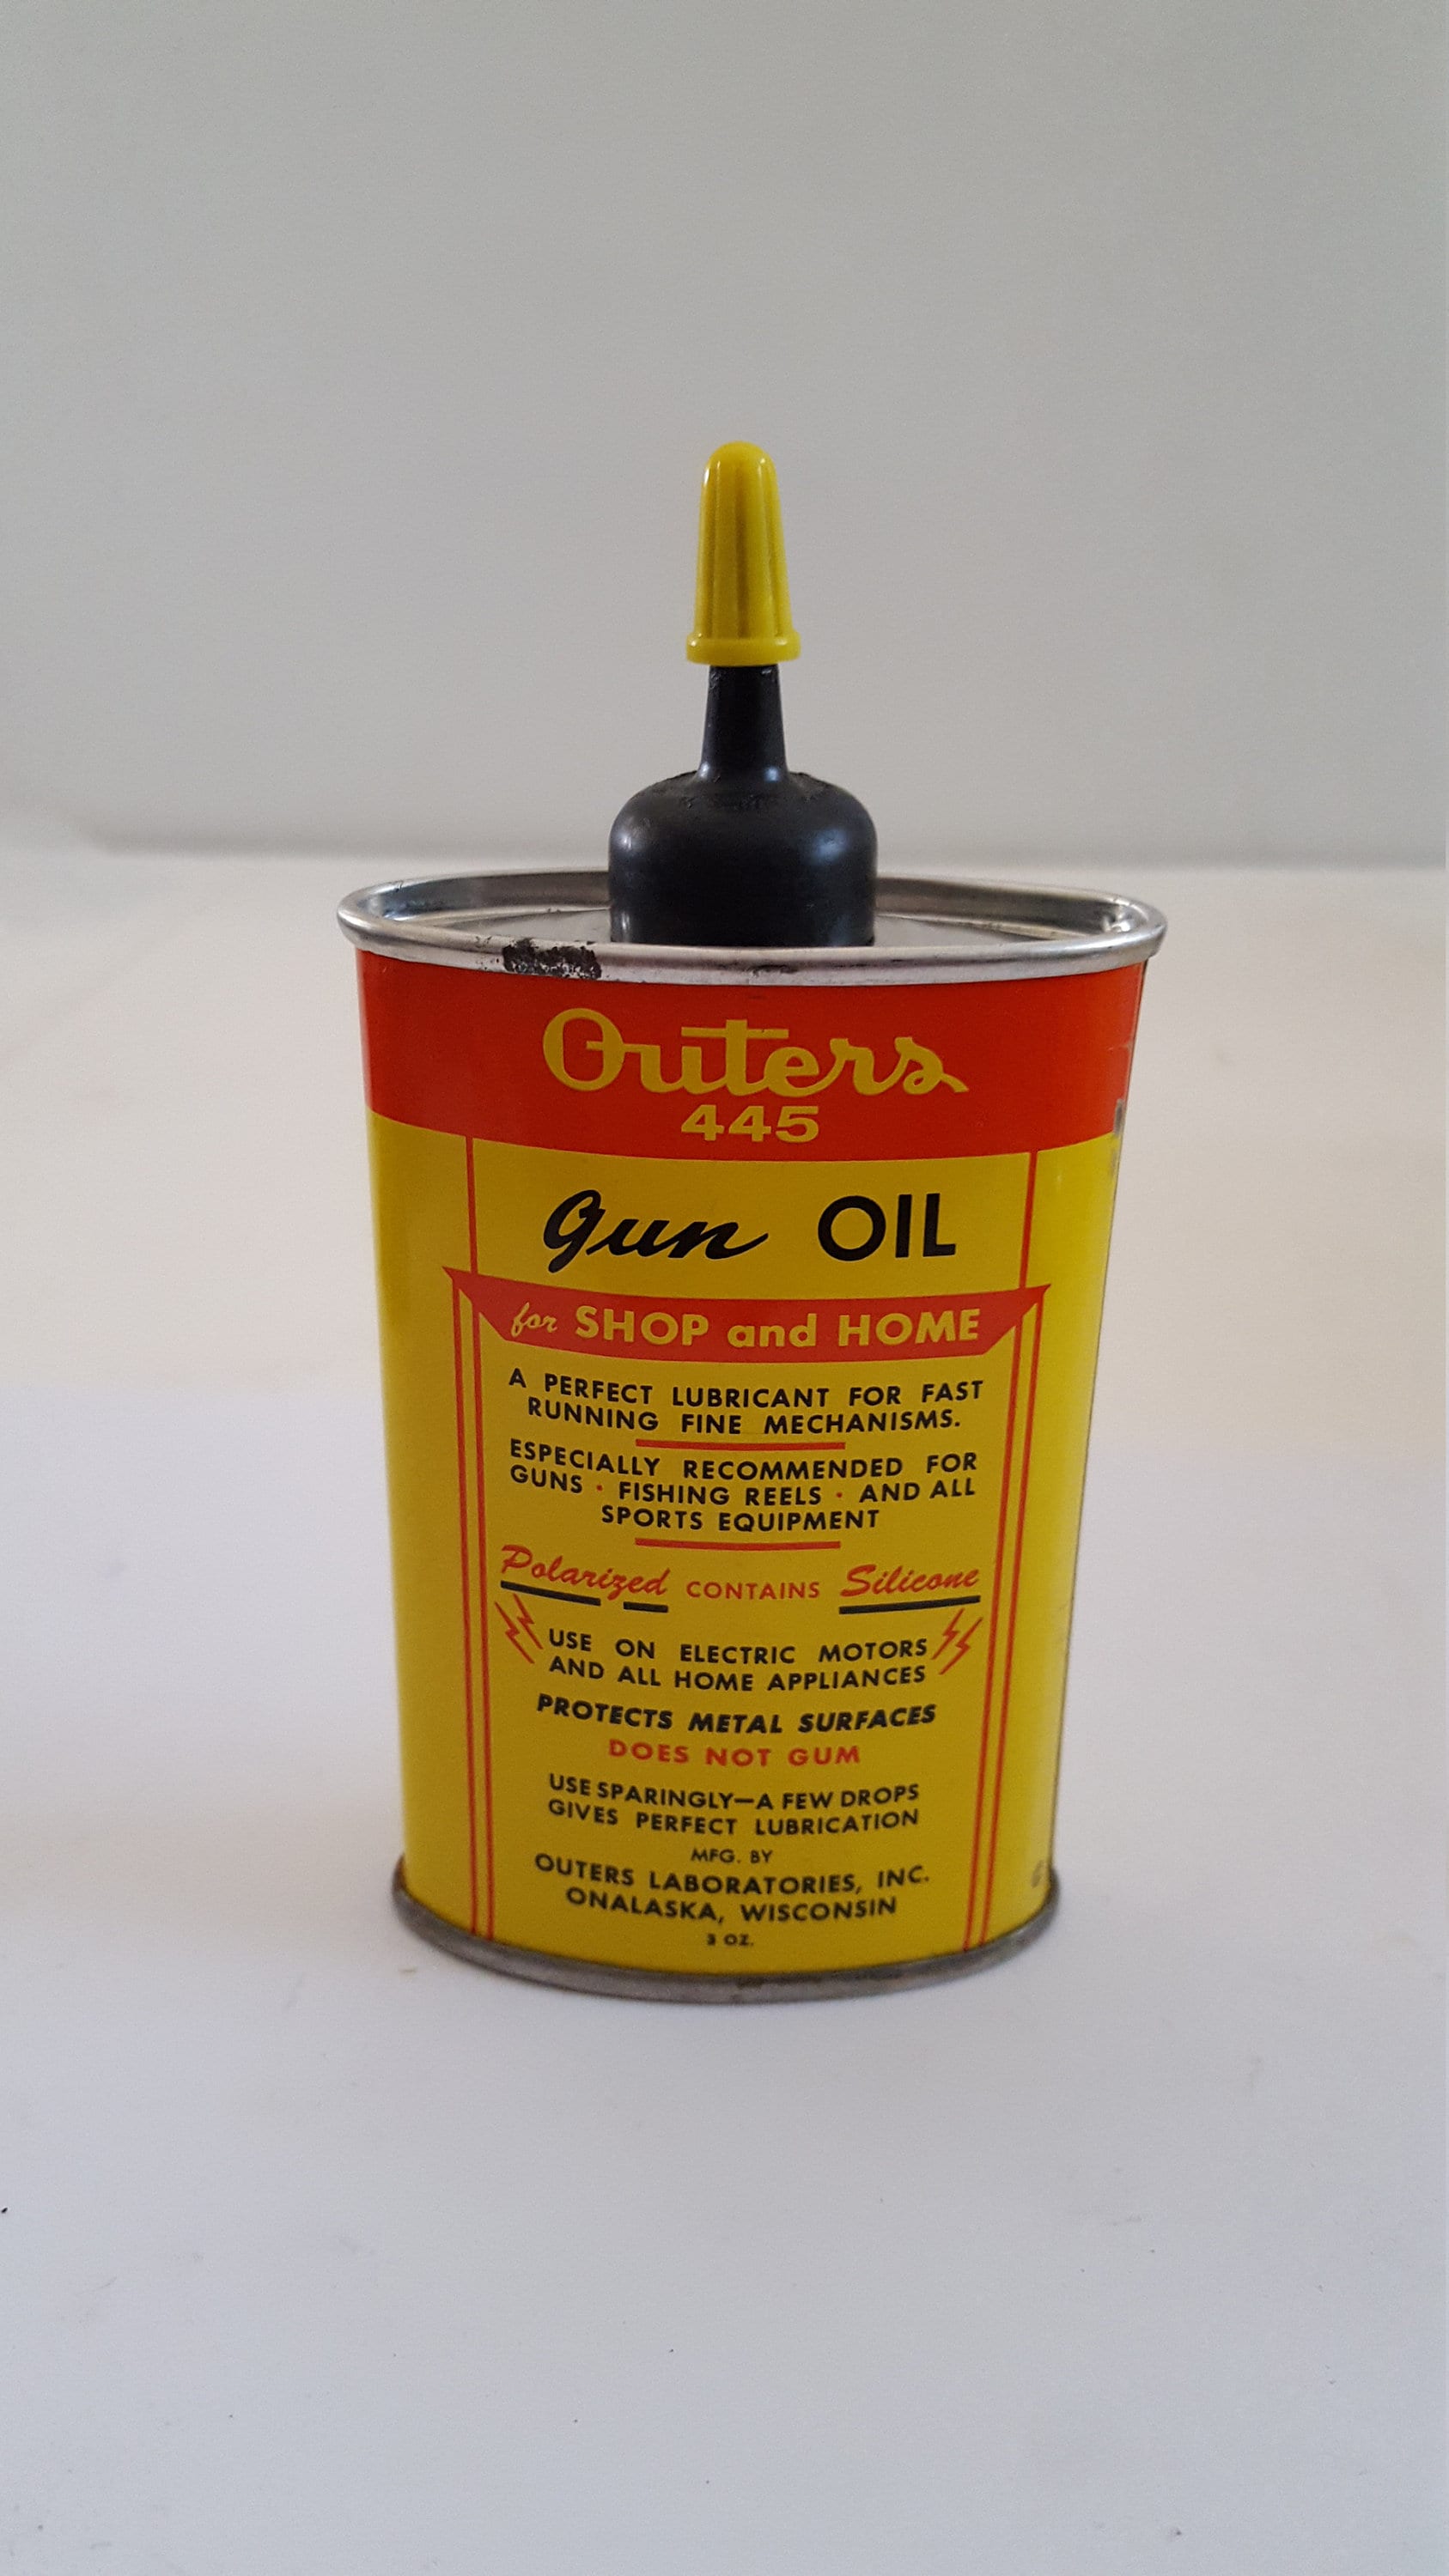 Vintage Circa 1960's outers 445 Gun Oil Can, Plastic Spout in